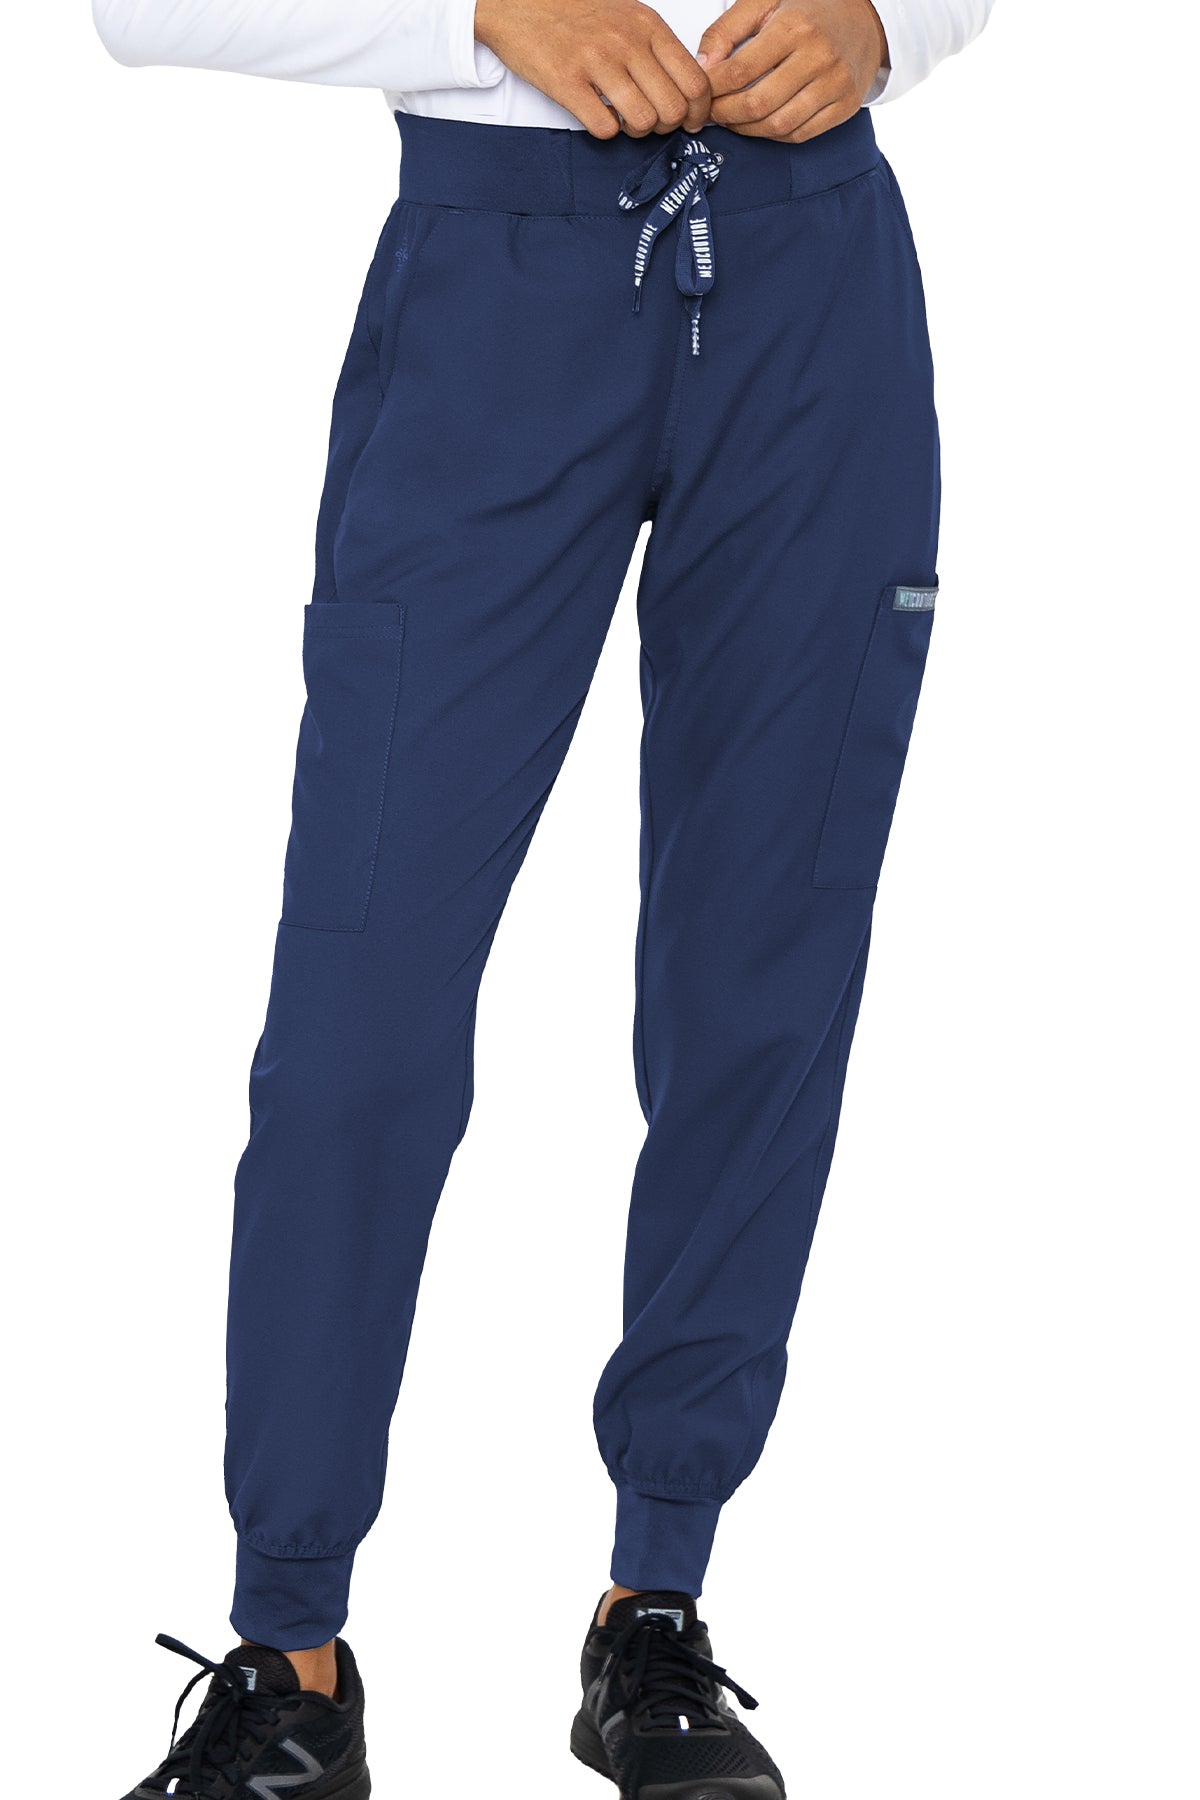 Med Couture Scrub Pants Insight Jogger Pant in Navy at Parker's Clothing and Shoes.